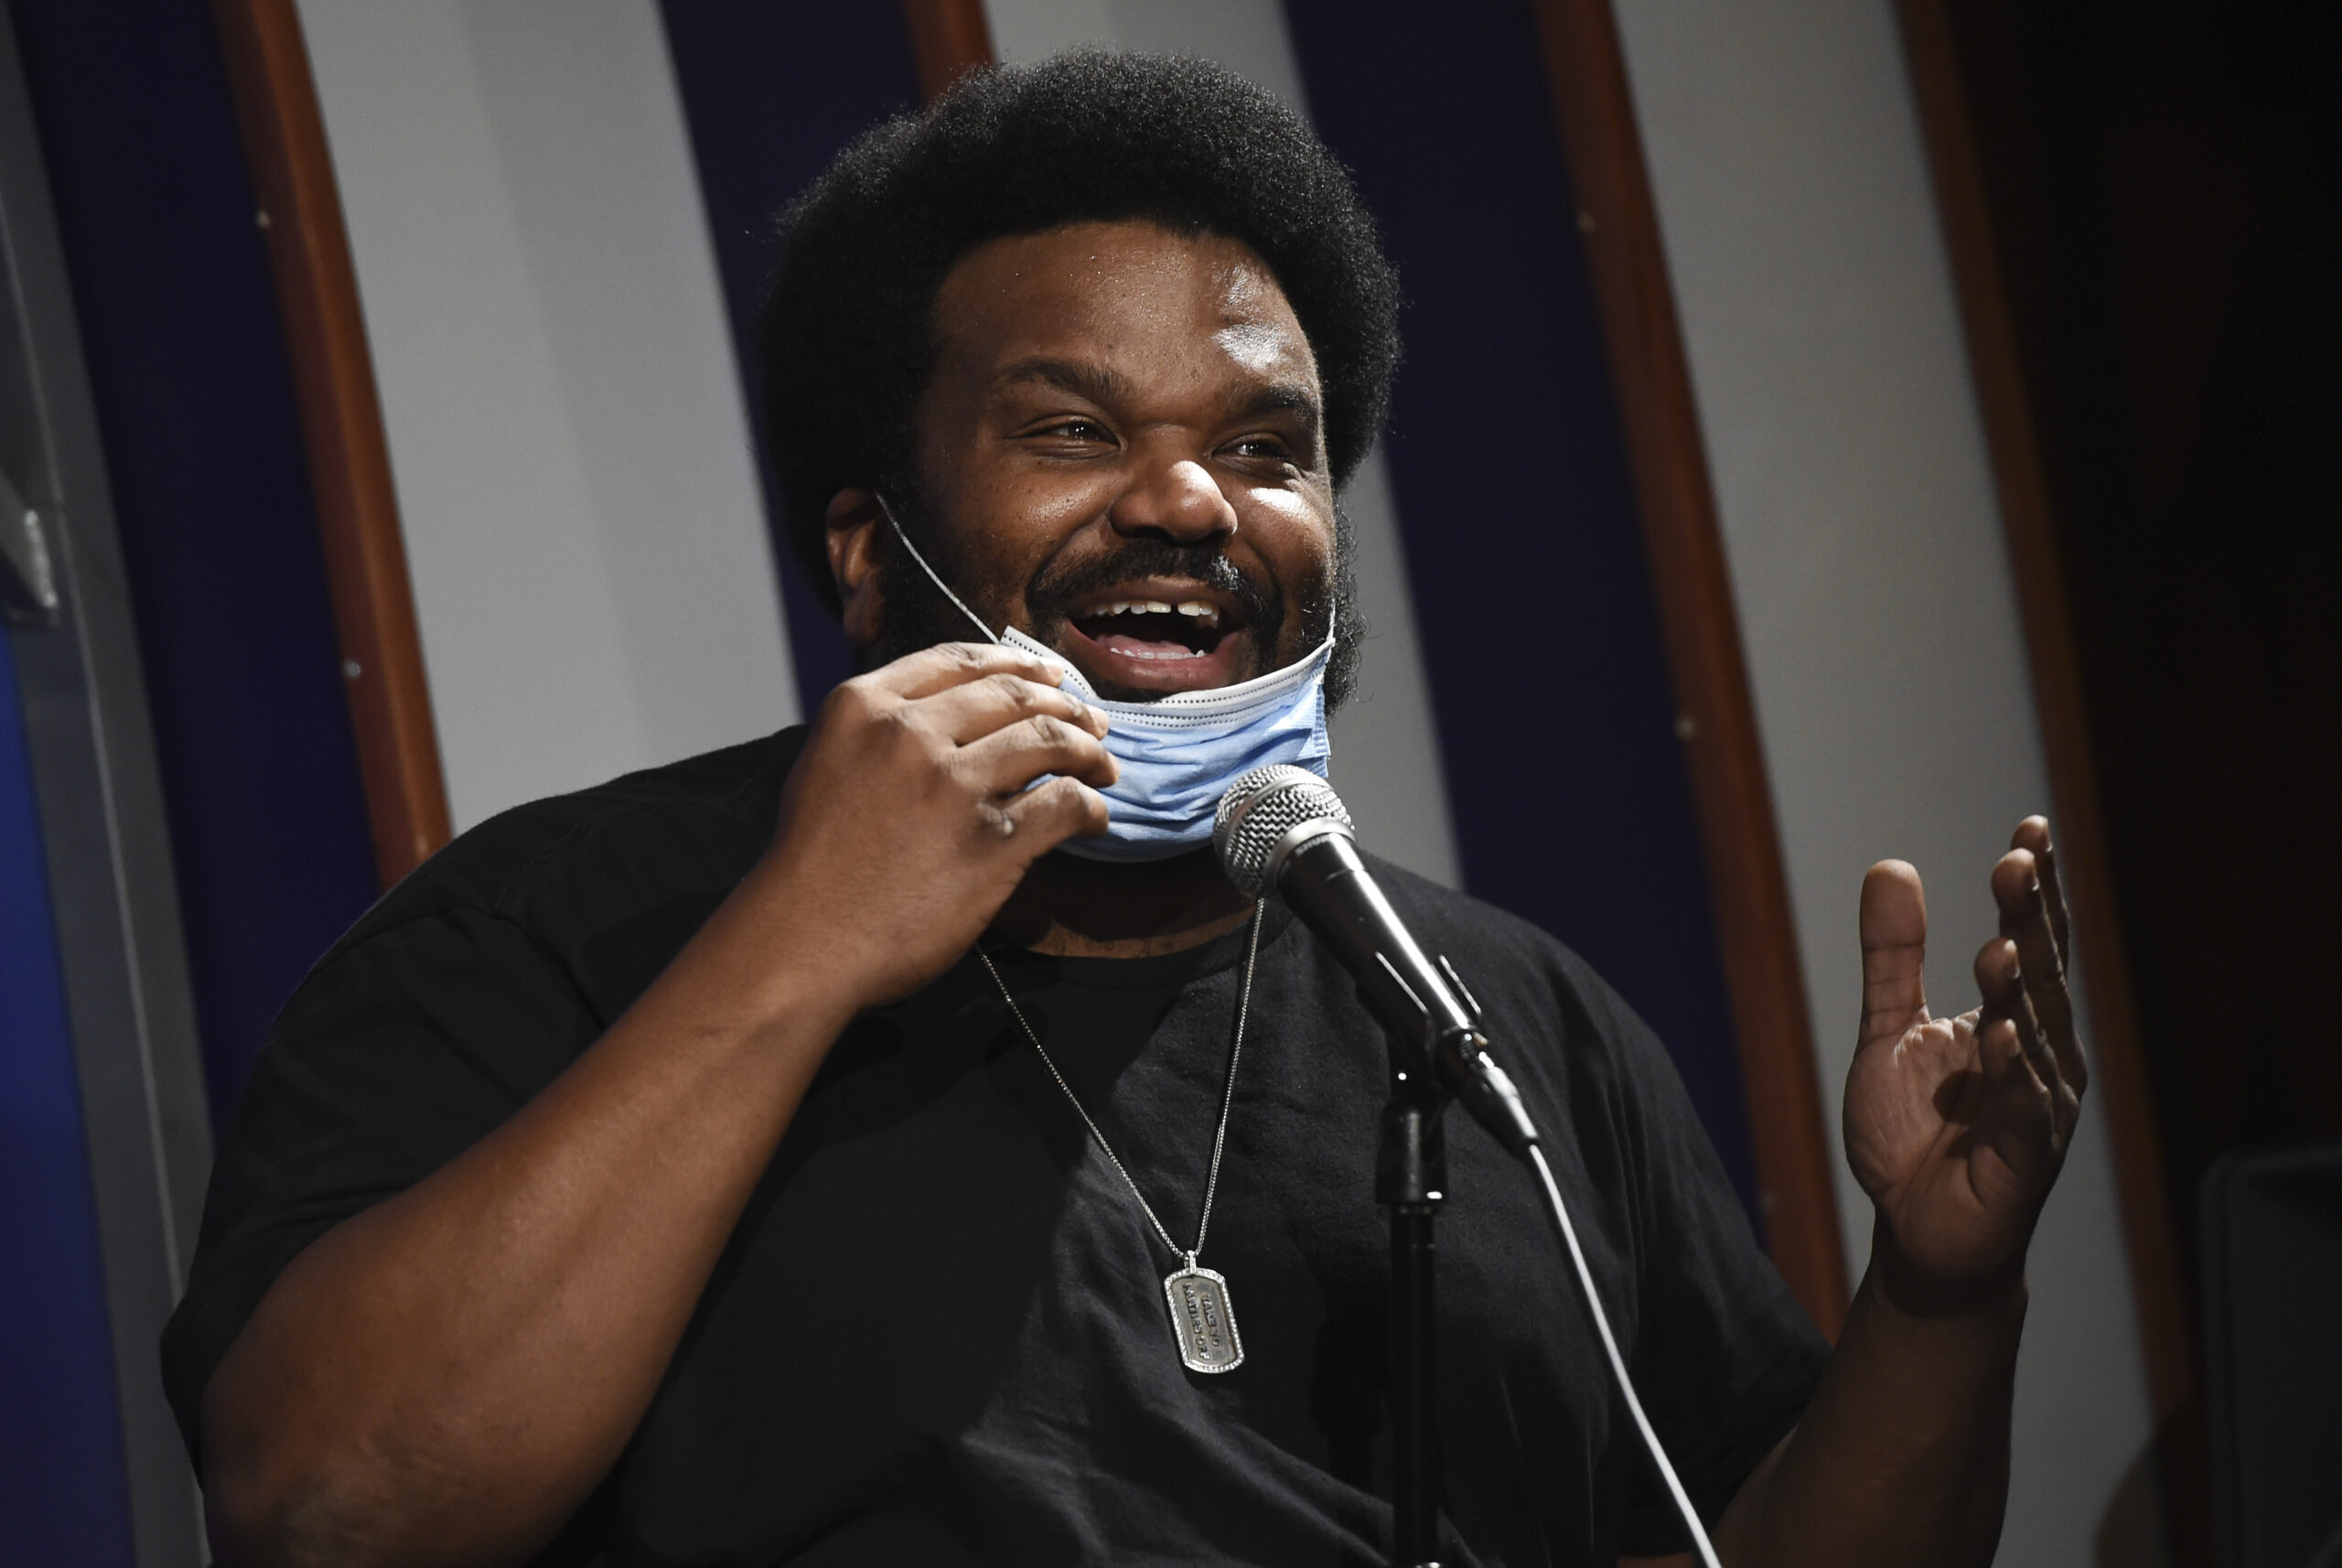 In this April 20, 2020, photo, comedian Craig Robinson performs at the Laugh Factory comedy club in Los Angeles. A man fired a gun inside a comedy club in North Carolina Saturday night, July 16, 2022 shortly after it was evacuated and before actor and comedian Craig Robinson was set to perform, police said. No one was injured. Club employees told WSOC-TV that the man waved a gun around and told everyone to leave before the venue emptied out. About 50 customers had been inside. (AP Photo/Chris Pizzello, file)